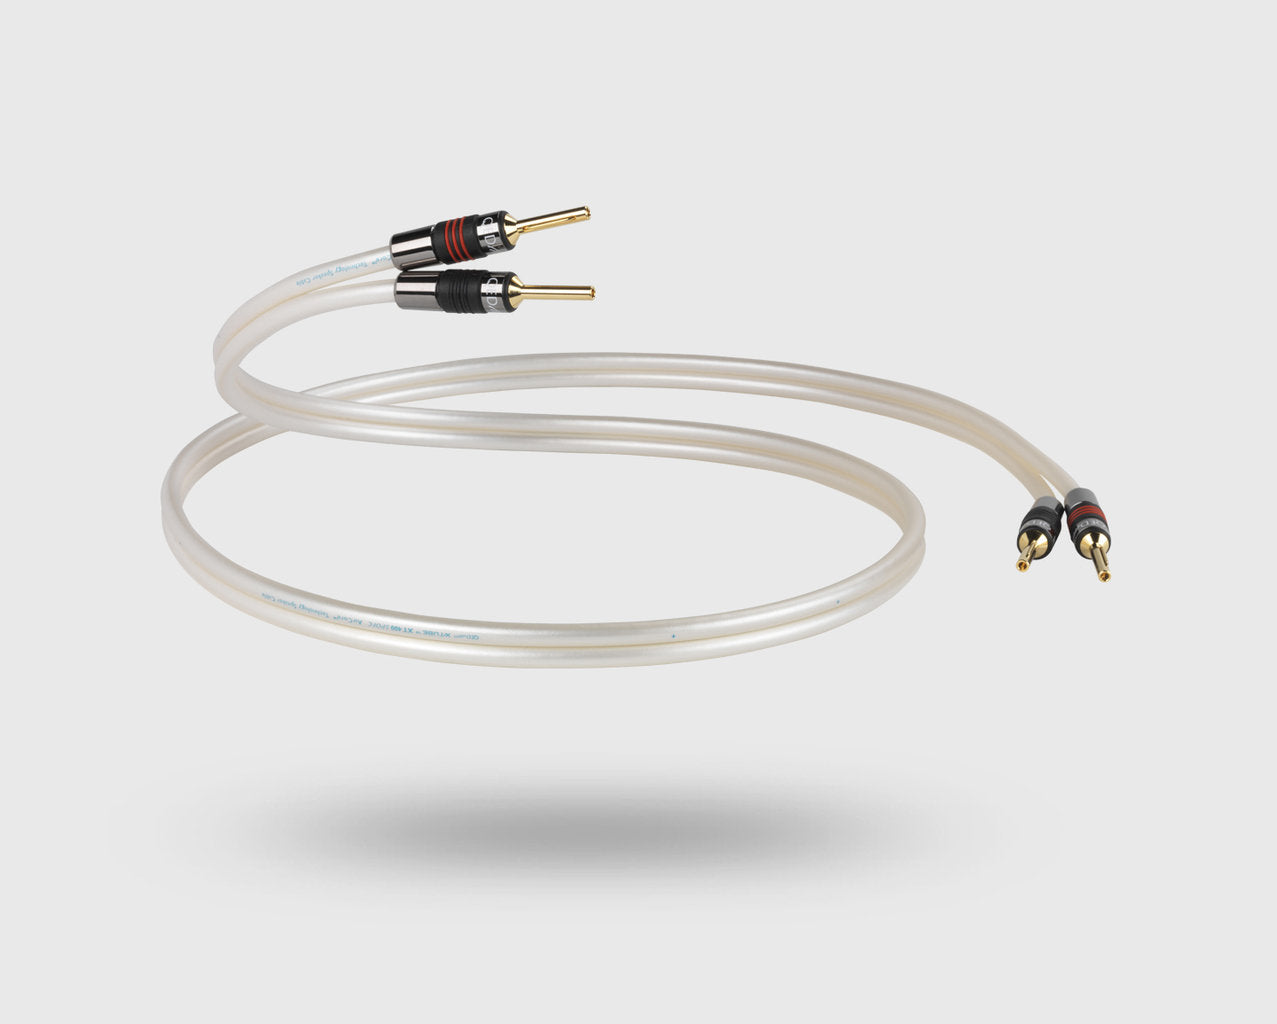 QED X-Tube 400 speaker cable